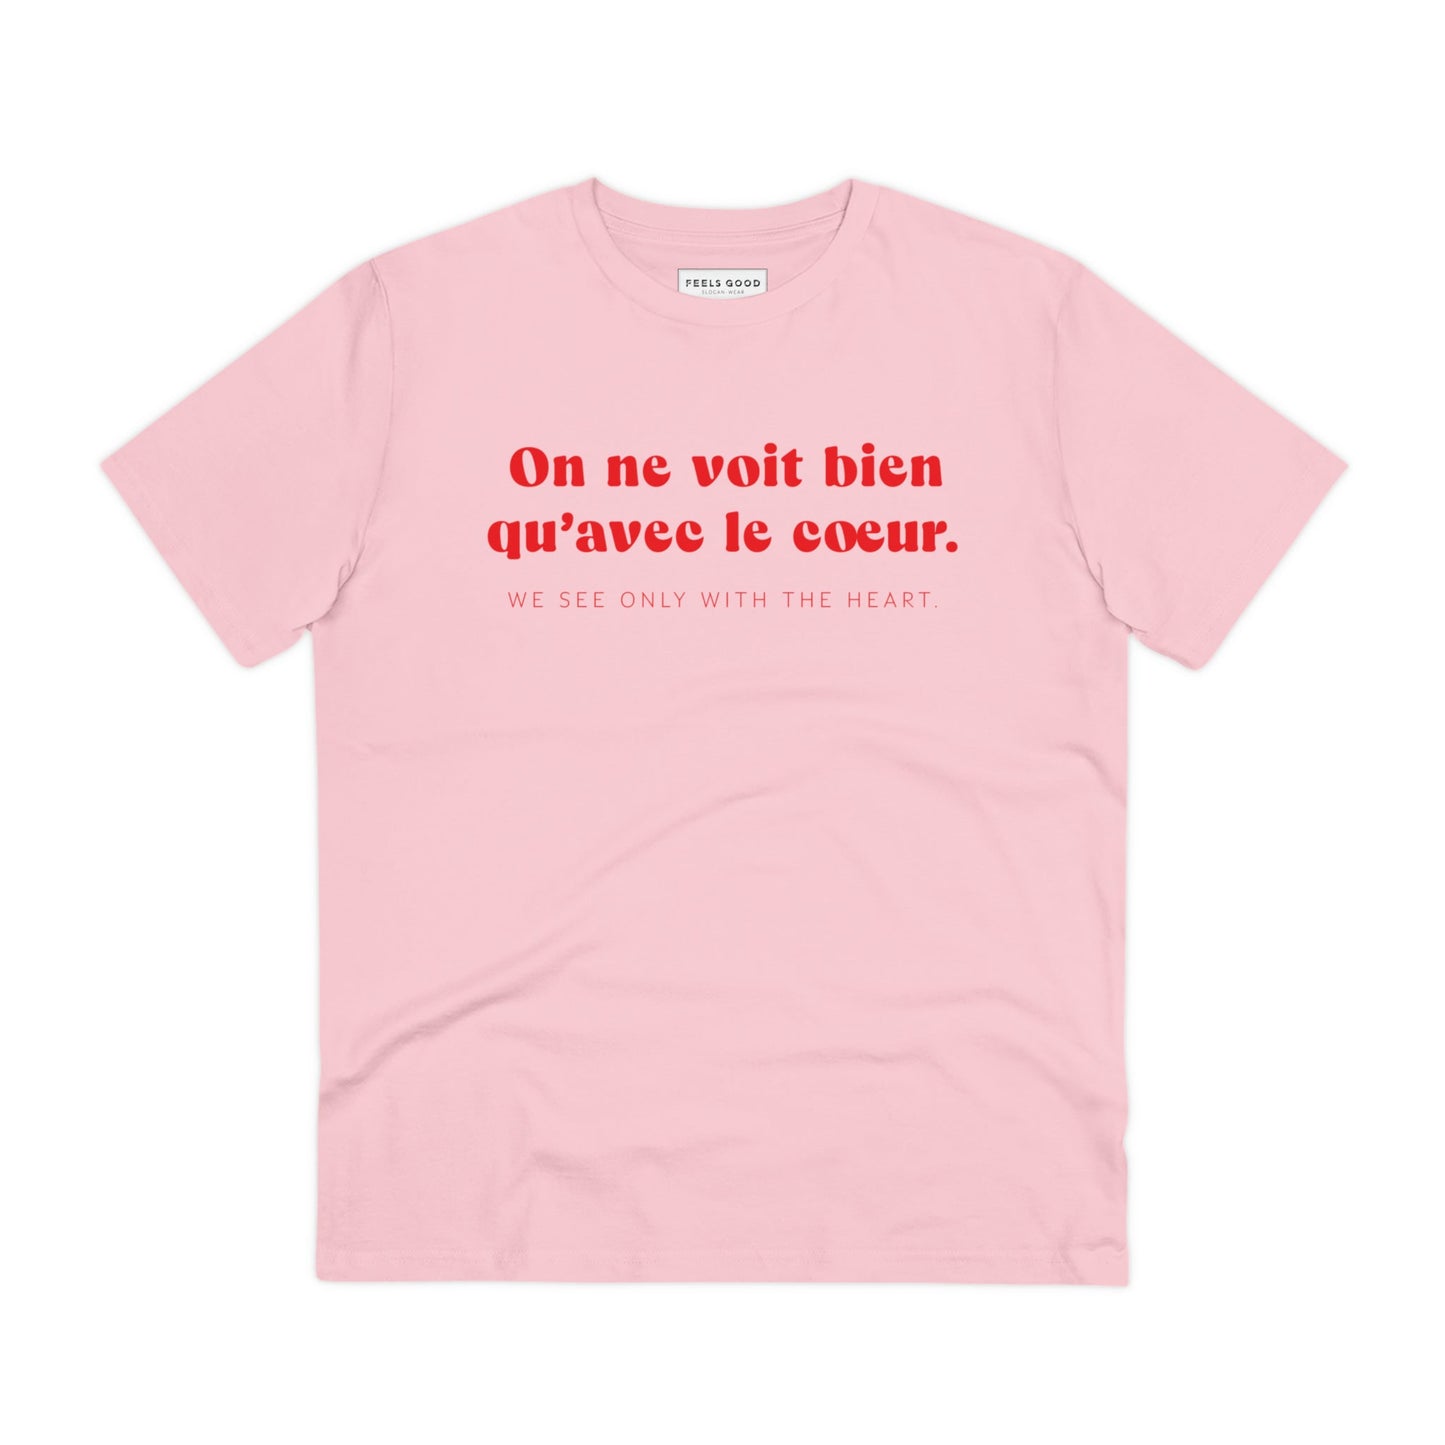 Francophile 'Seeing With The Heart' Organic Cotton T-shirt - Francophile Tshirt